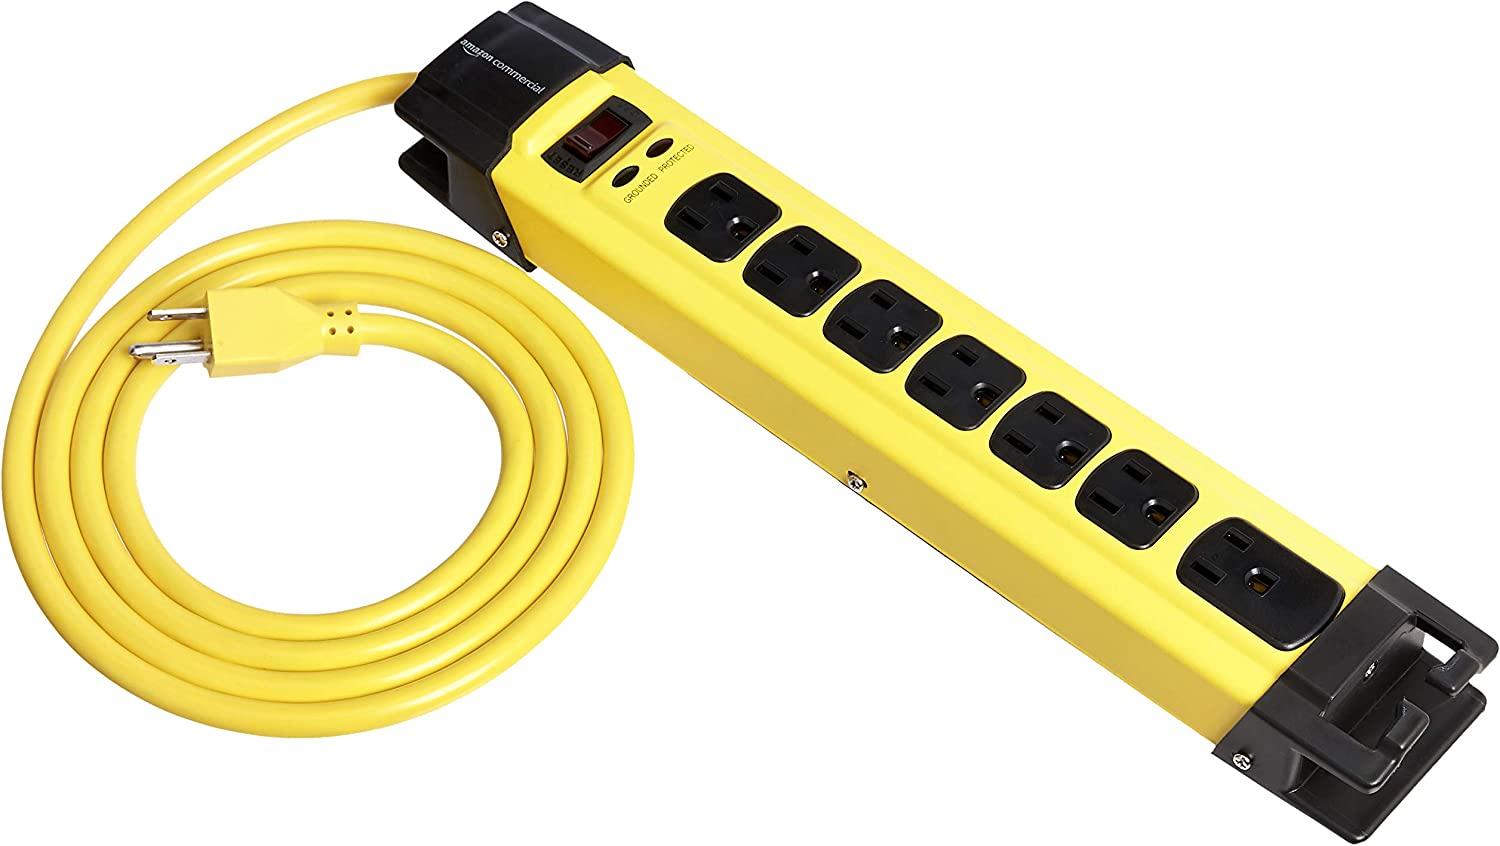 AmazonCommercial Heavy Duty Metal Surge Protector Power Strip for $13.58